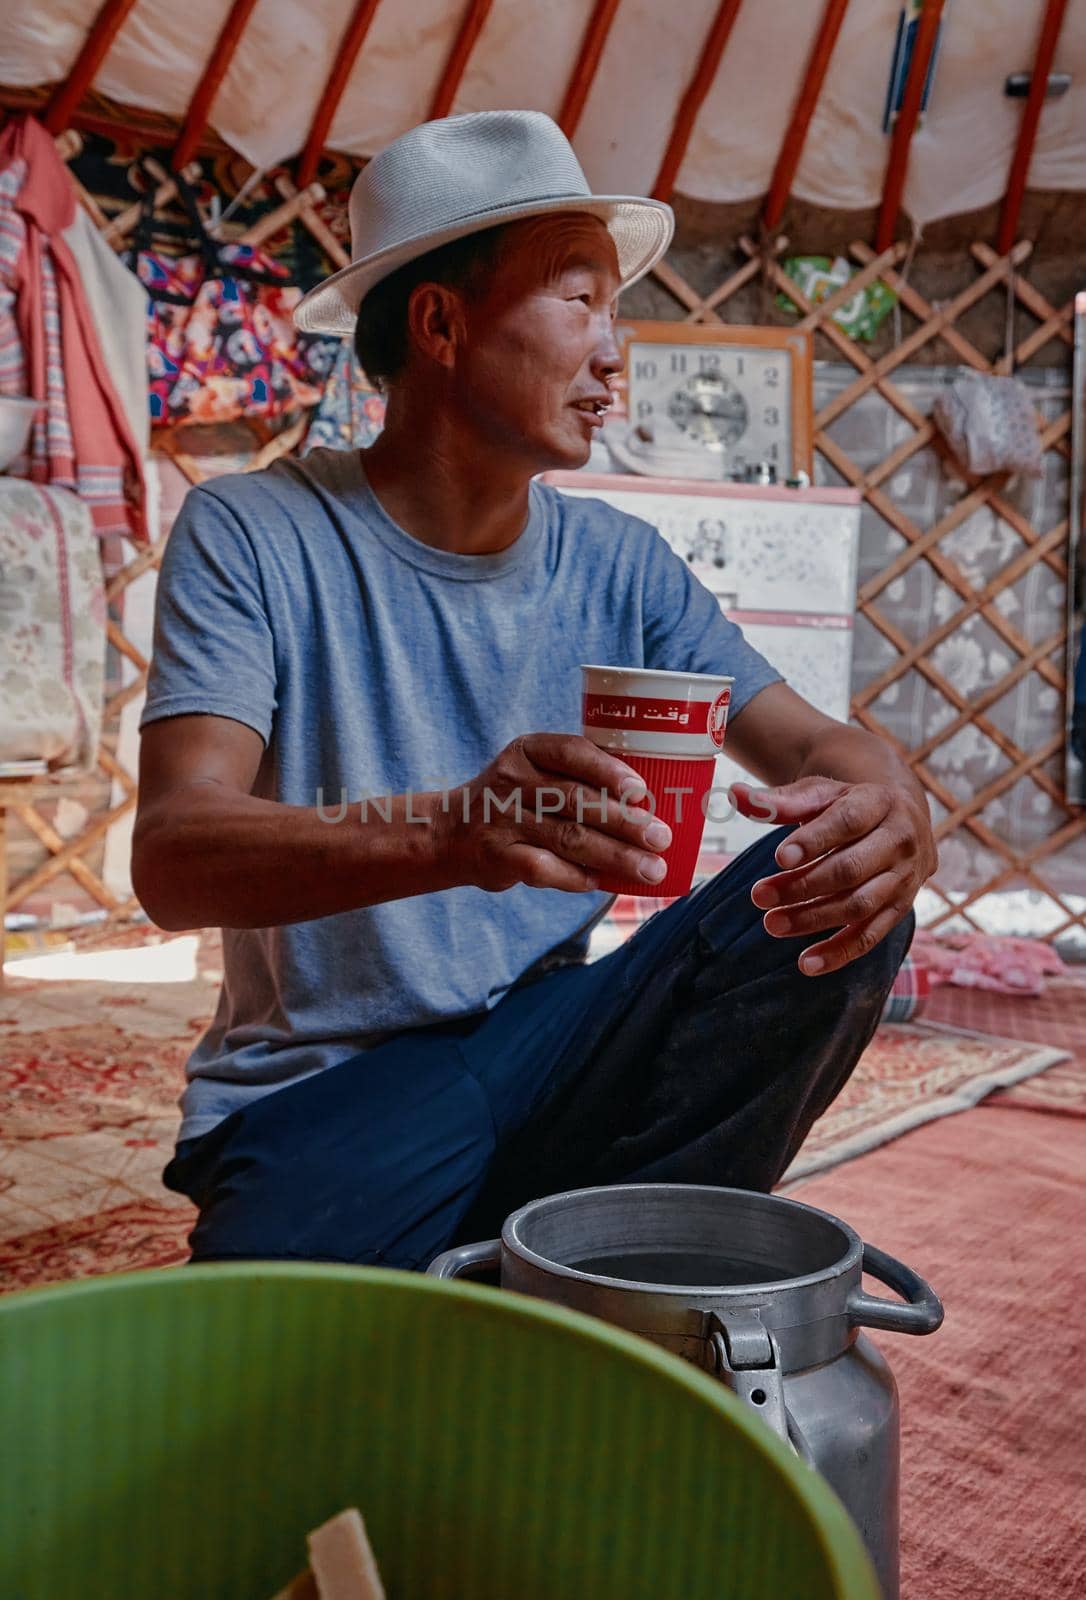 Life of the Mongolian Yurt. Interior of the nomad's house. The man pours some home brew, tasting of home-made alcohol. 06.09.2019. Gobi Desert, Mongolia.